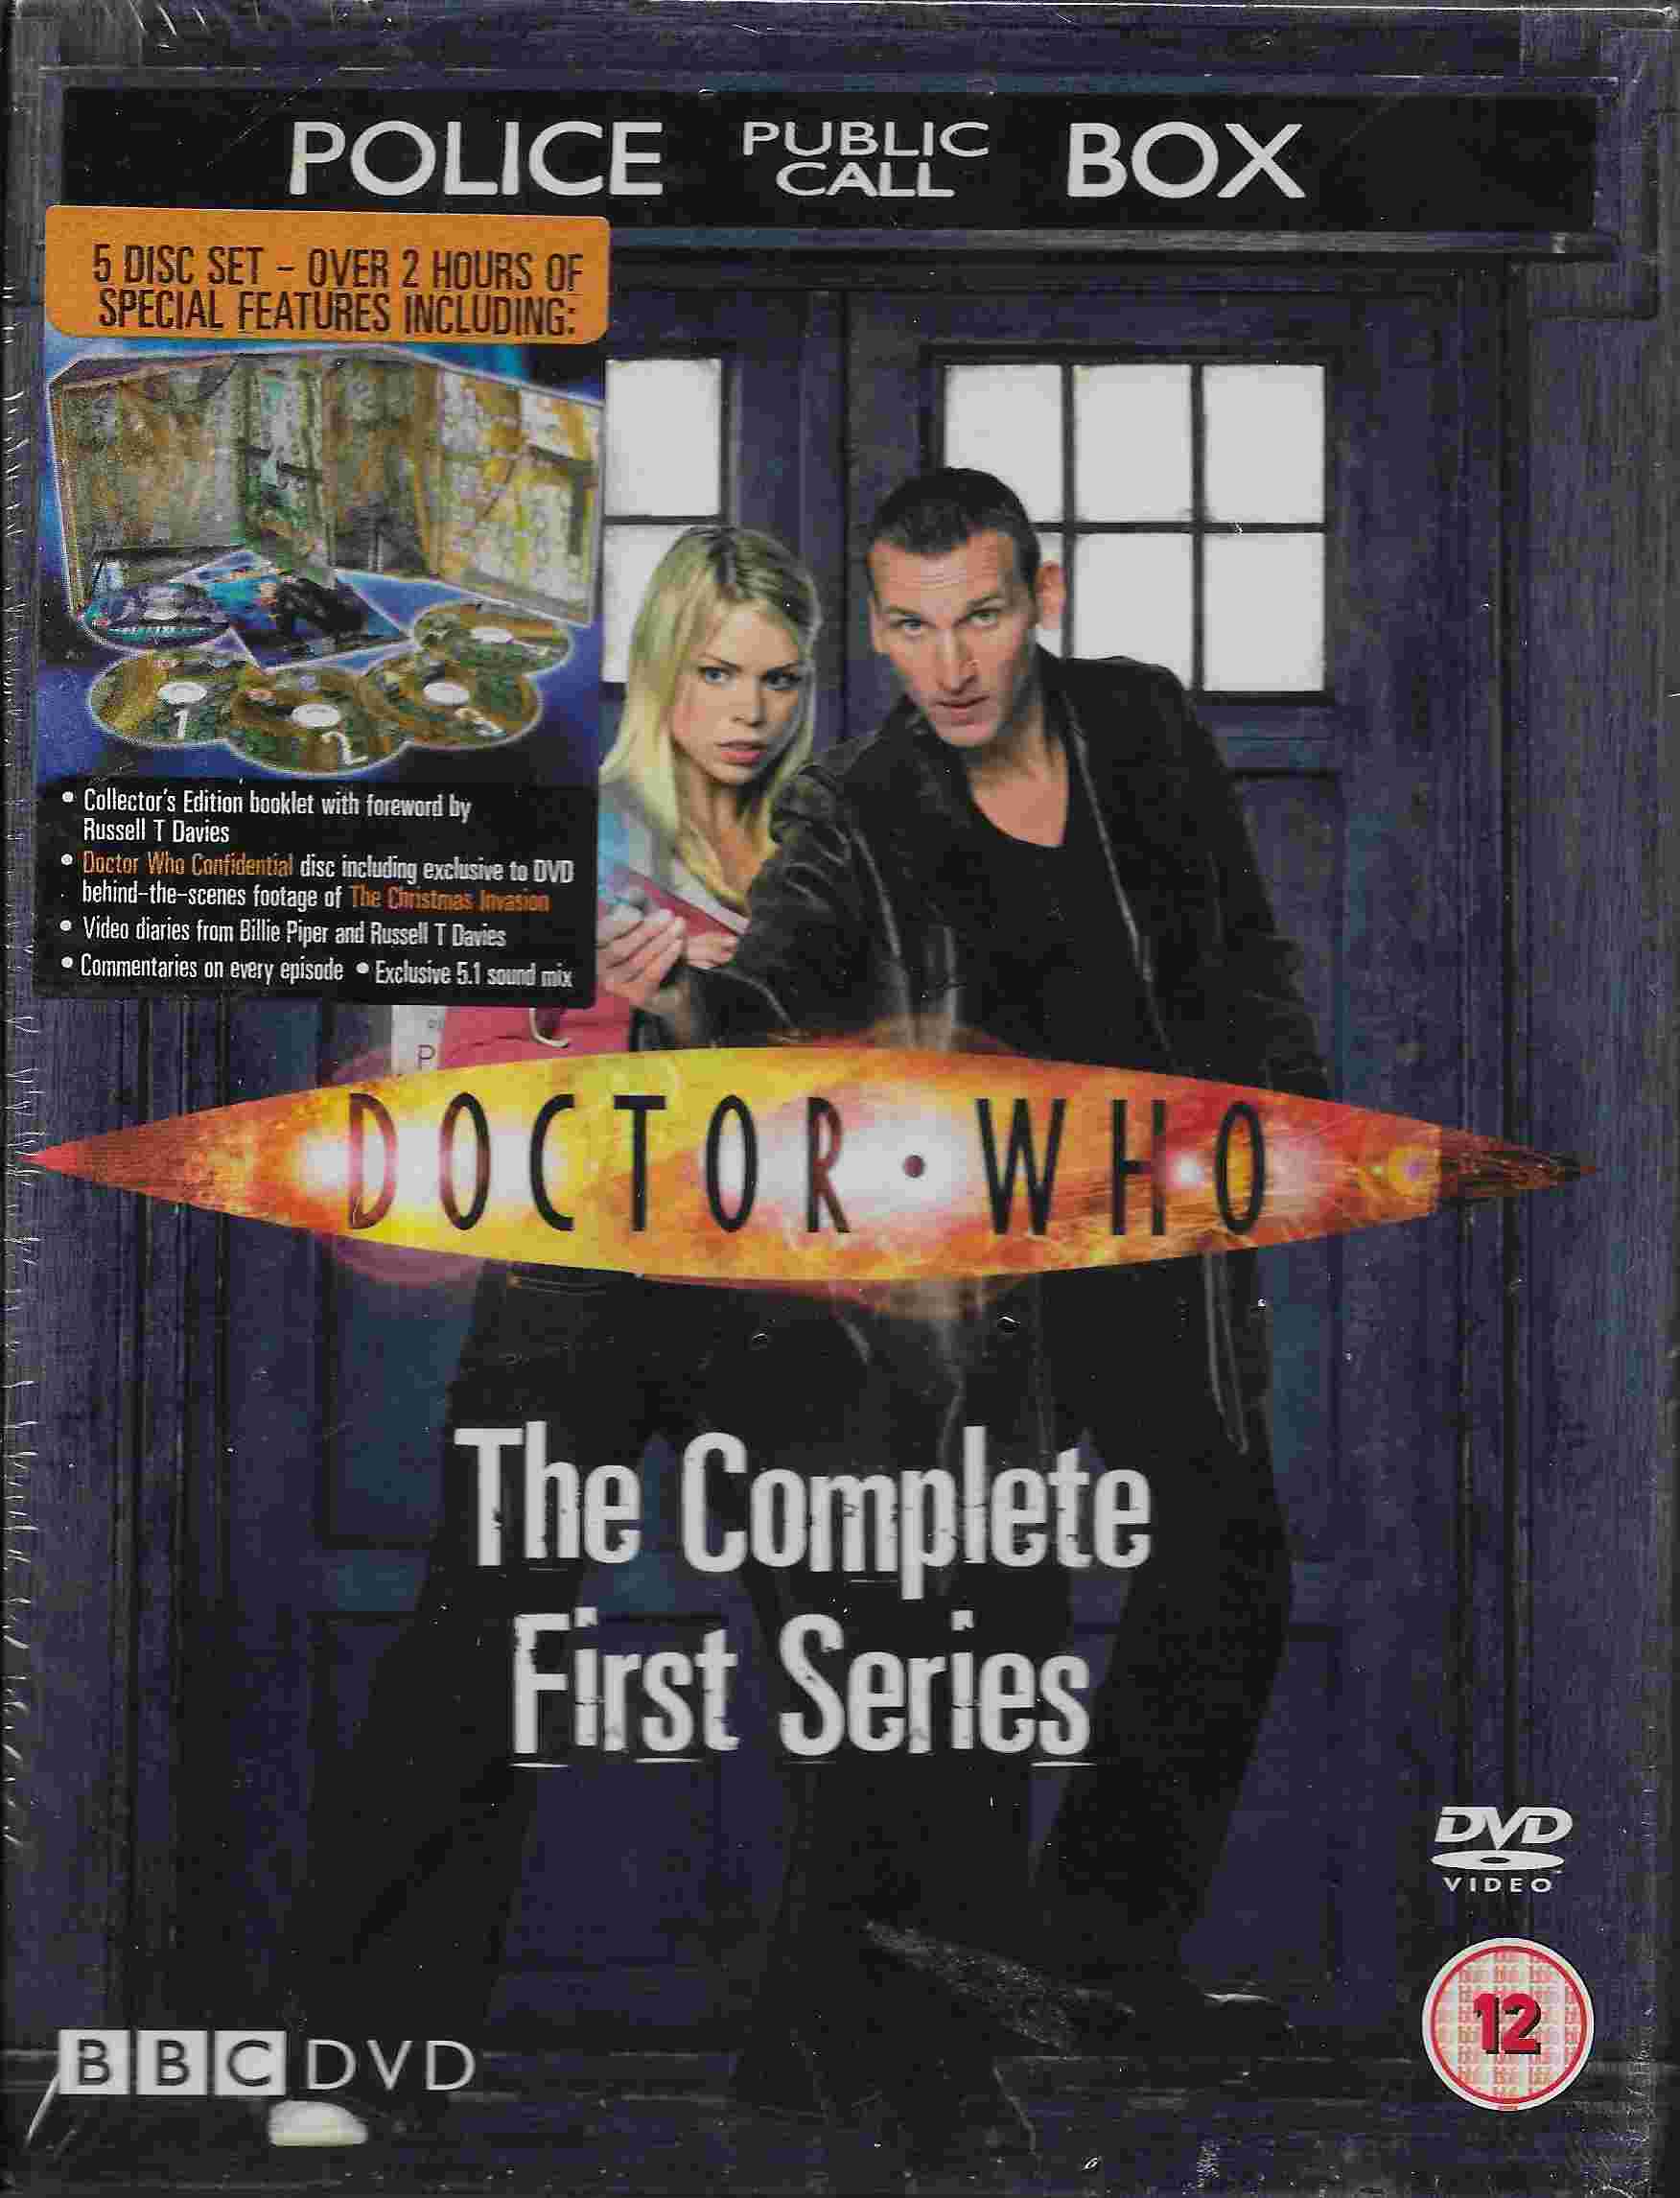 Picture of BBCDVD 1770 Doctor Who - Series 1 by artist Various from the BBC dvds - Records and Tapes library